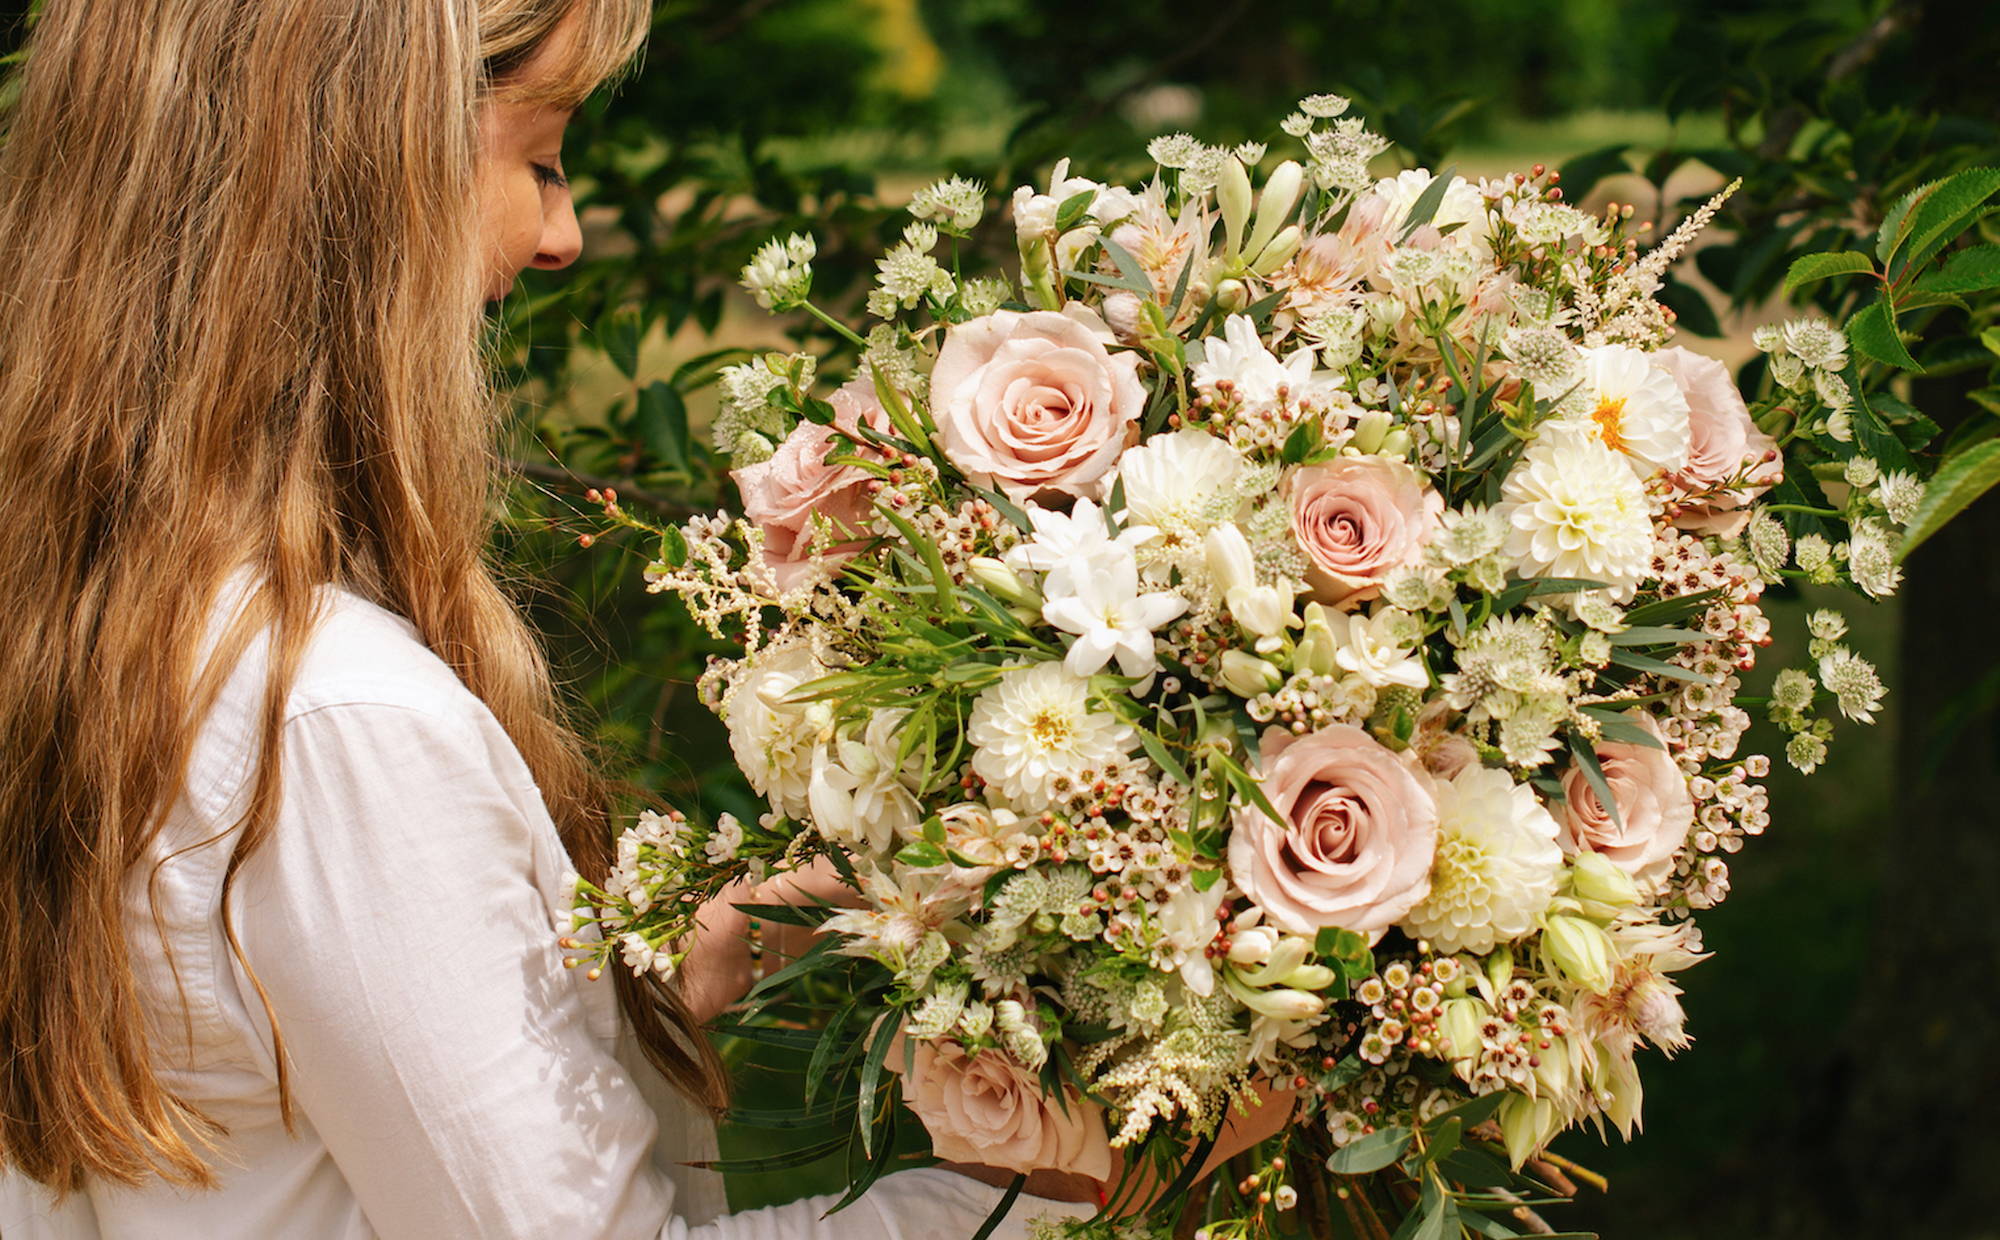 Wild at Heart Summer Garden Delights Bouquet, featuring white dahlias, tuberose and quicksand roses.